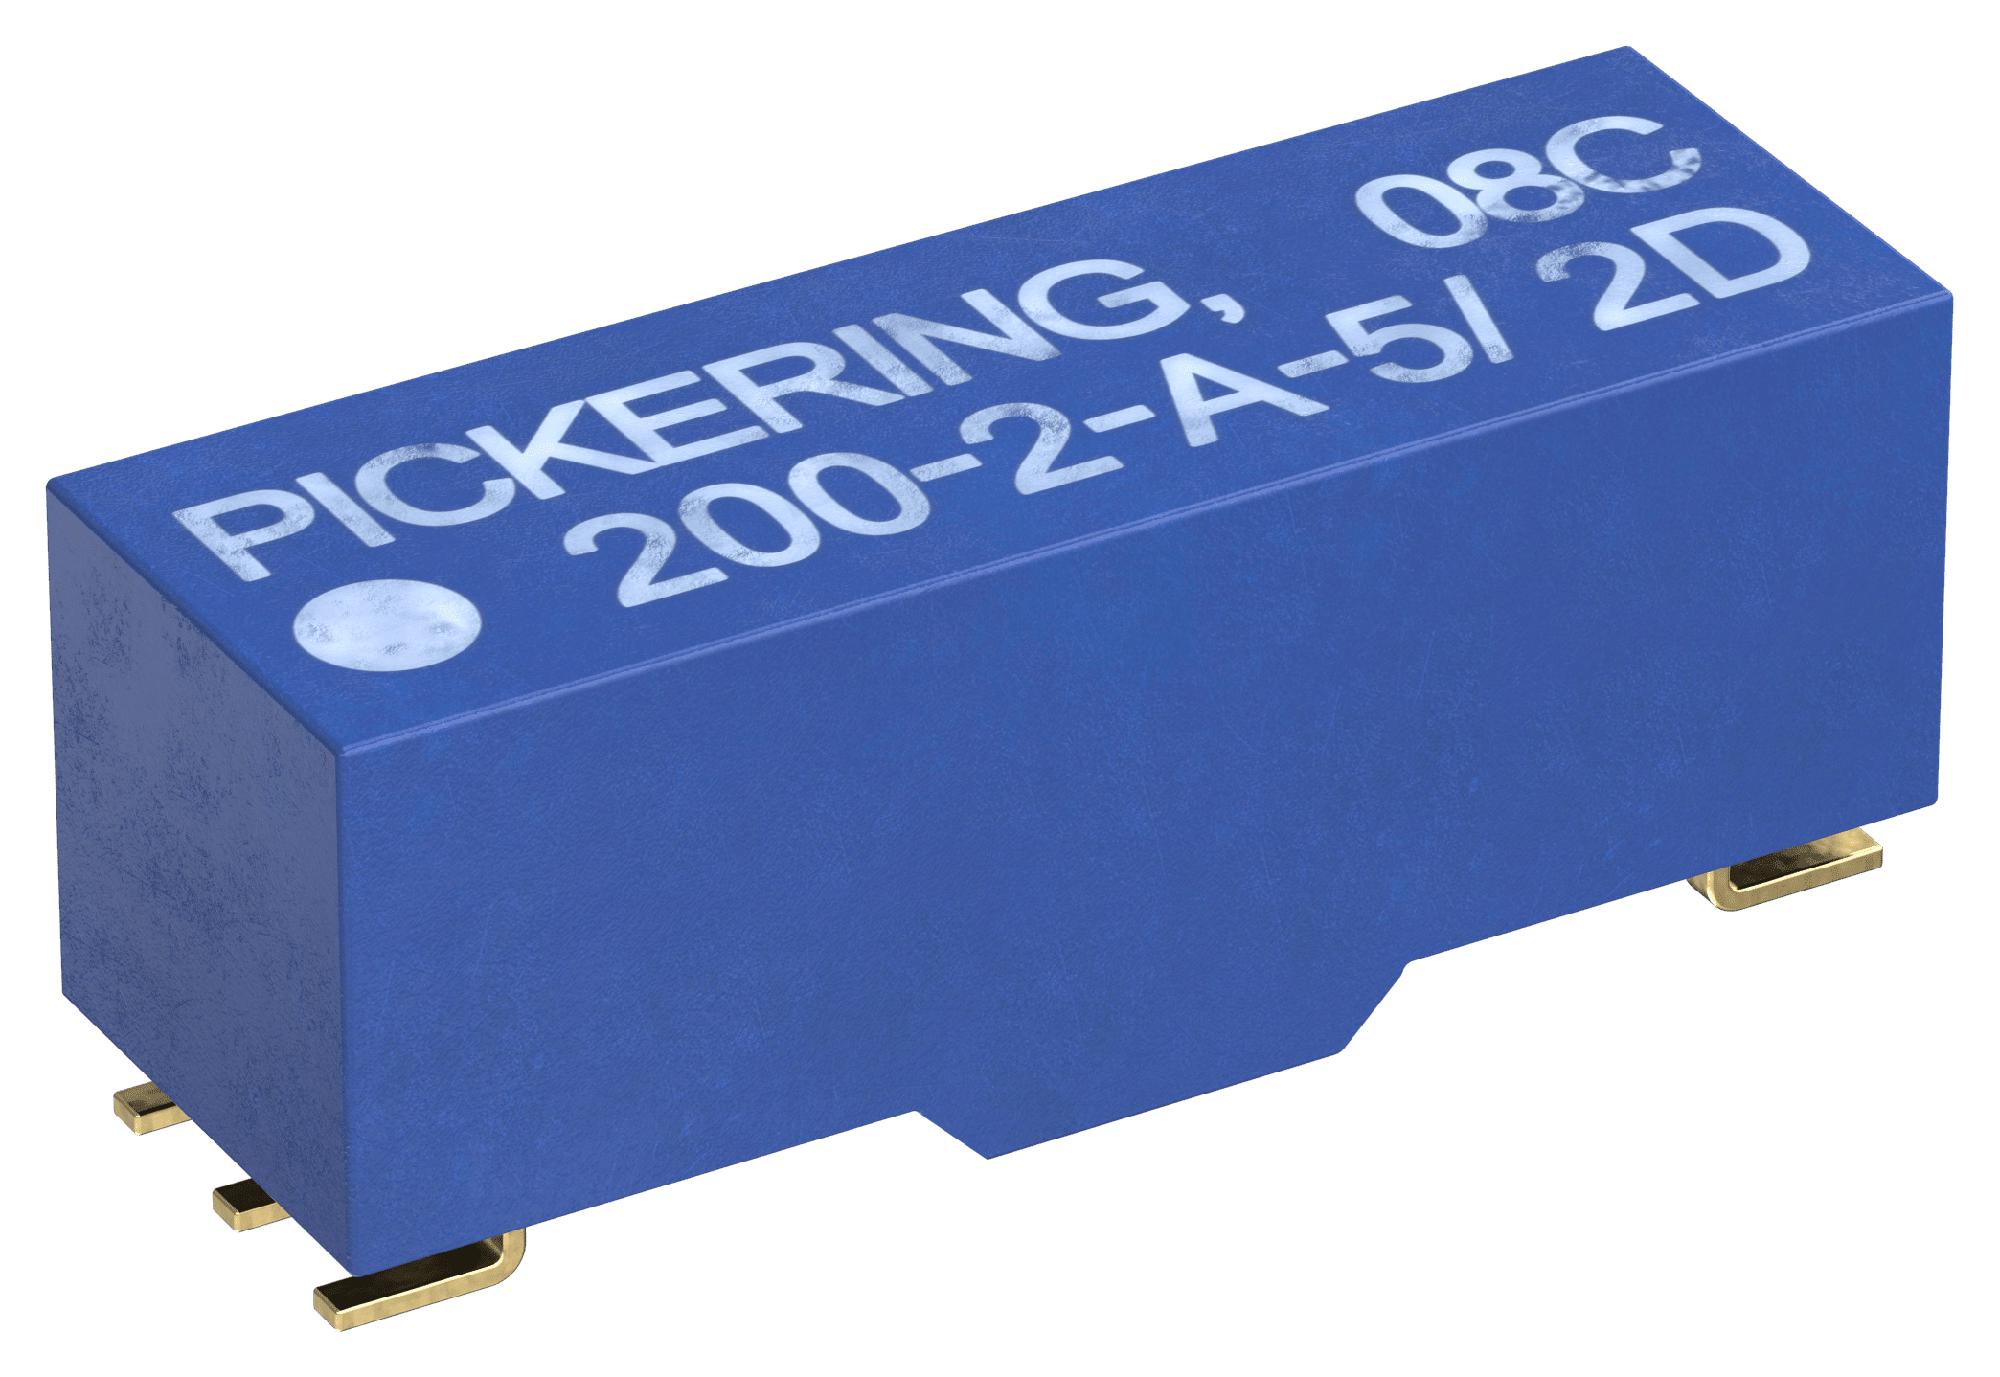 Pickering 200-2-A-5/2D Reed Relay, Dpst-No, 5V, Smd